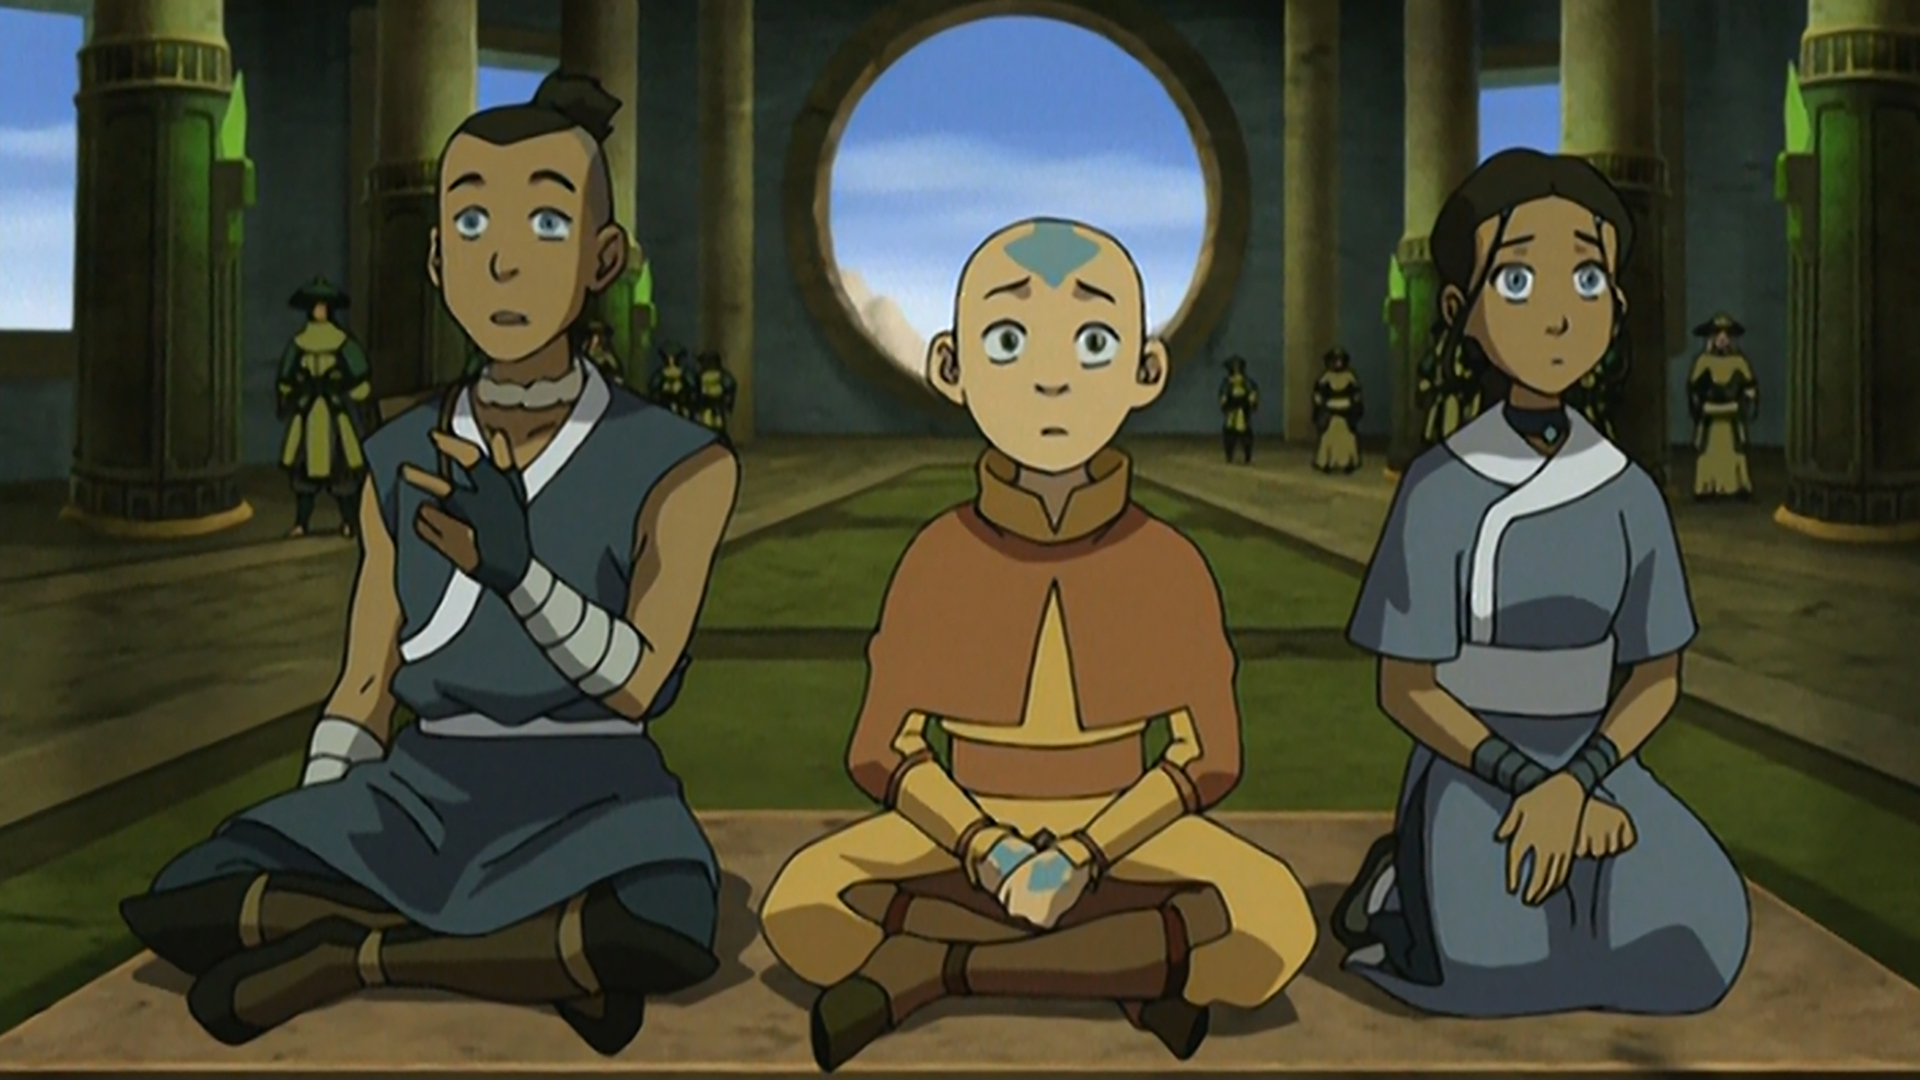 New Avatar The Last Airbender Film Will Be ReCast Says Voice of Toph   Animation Magazine